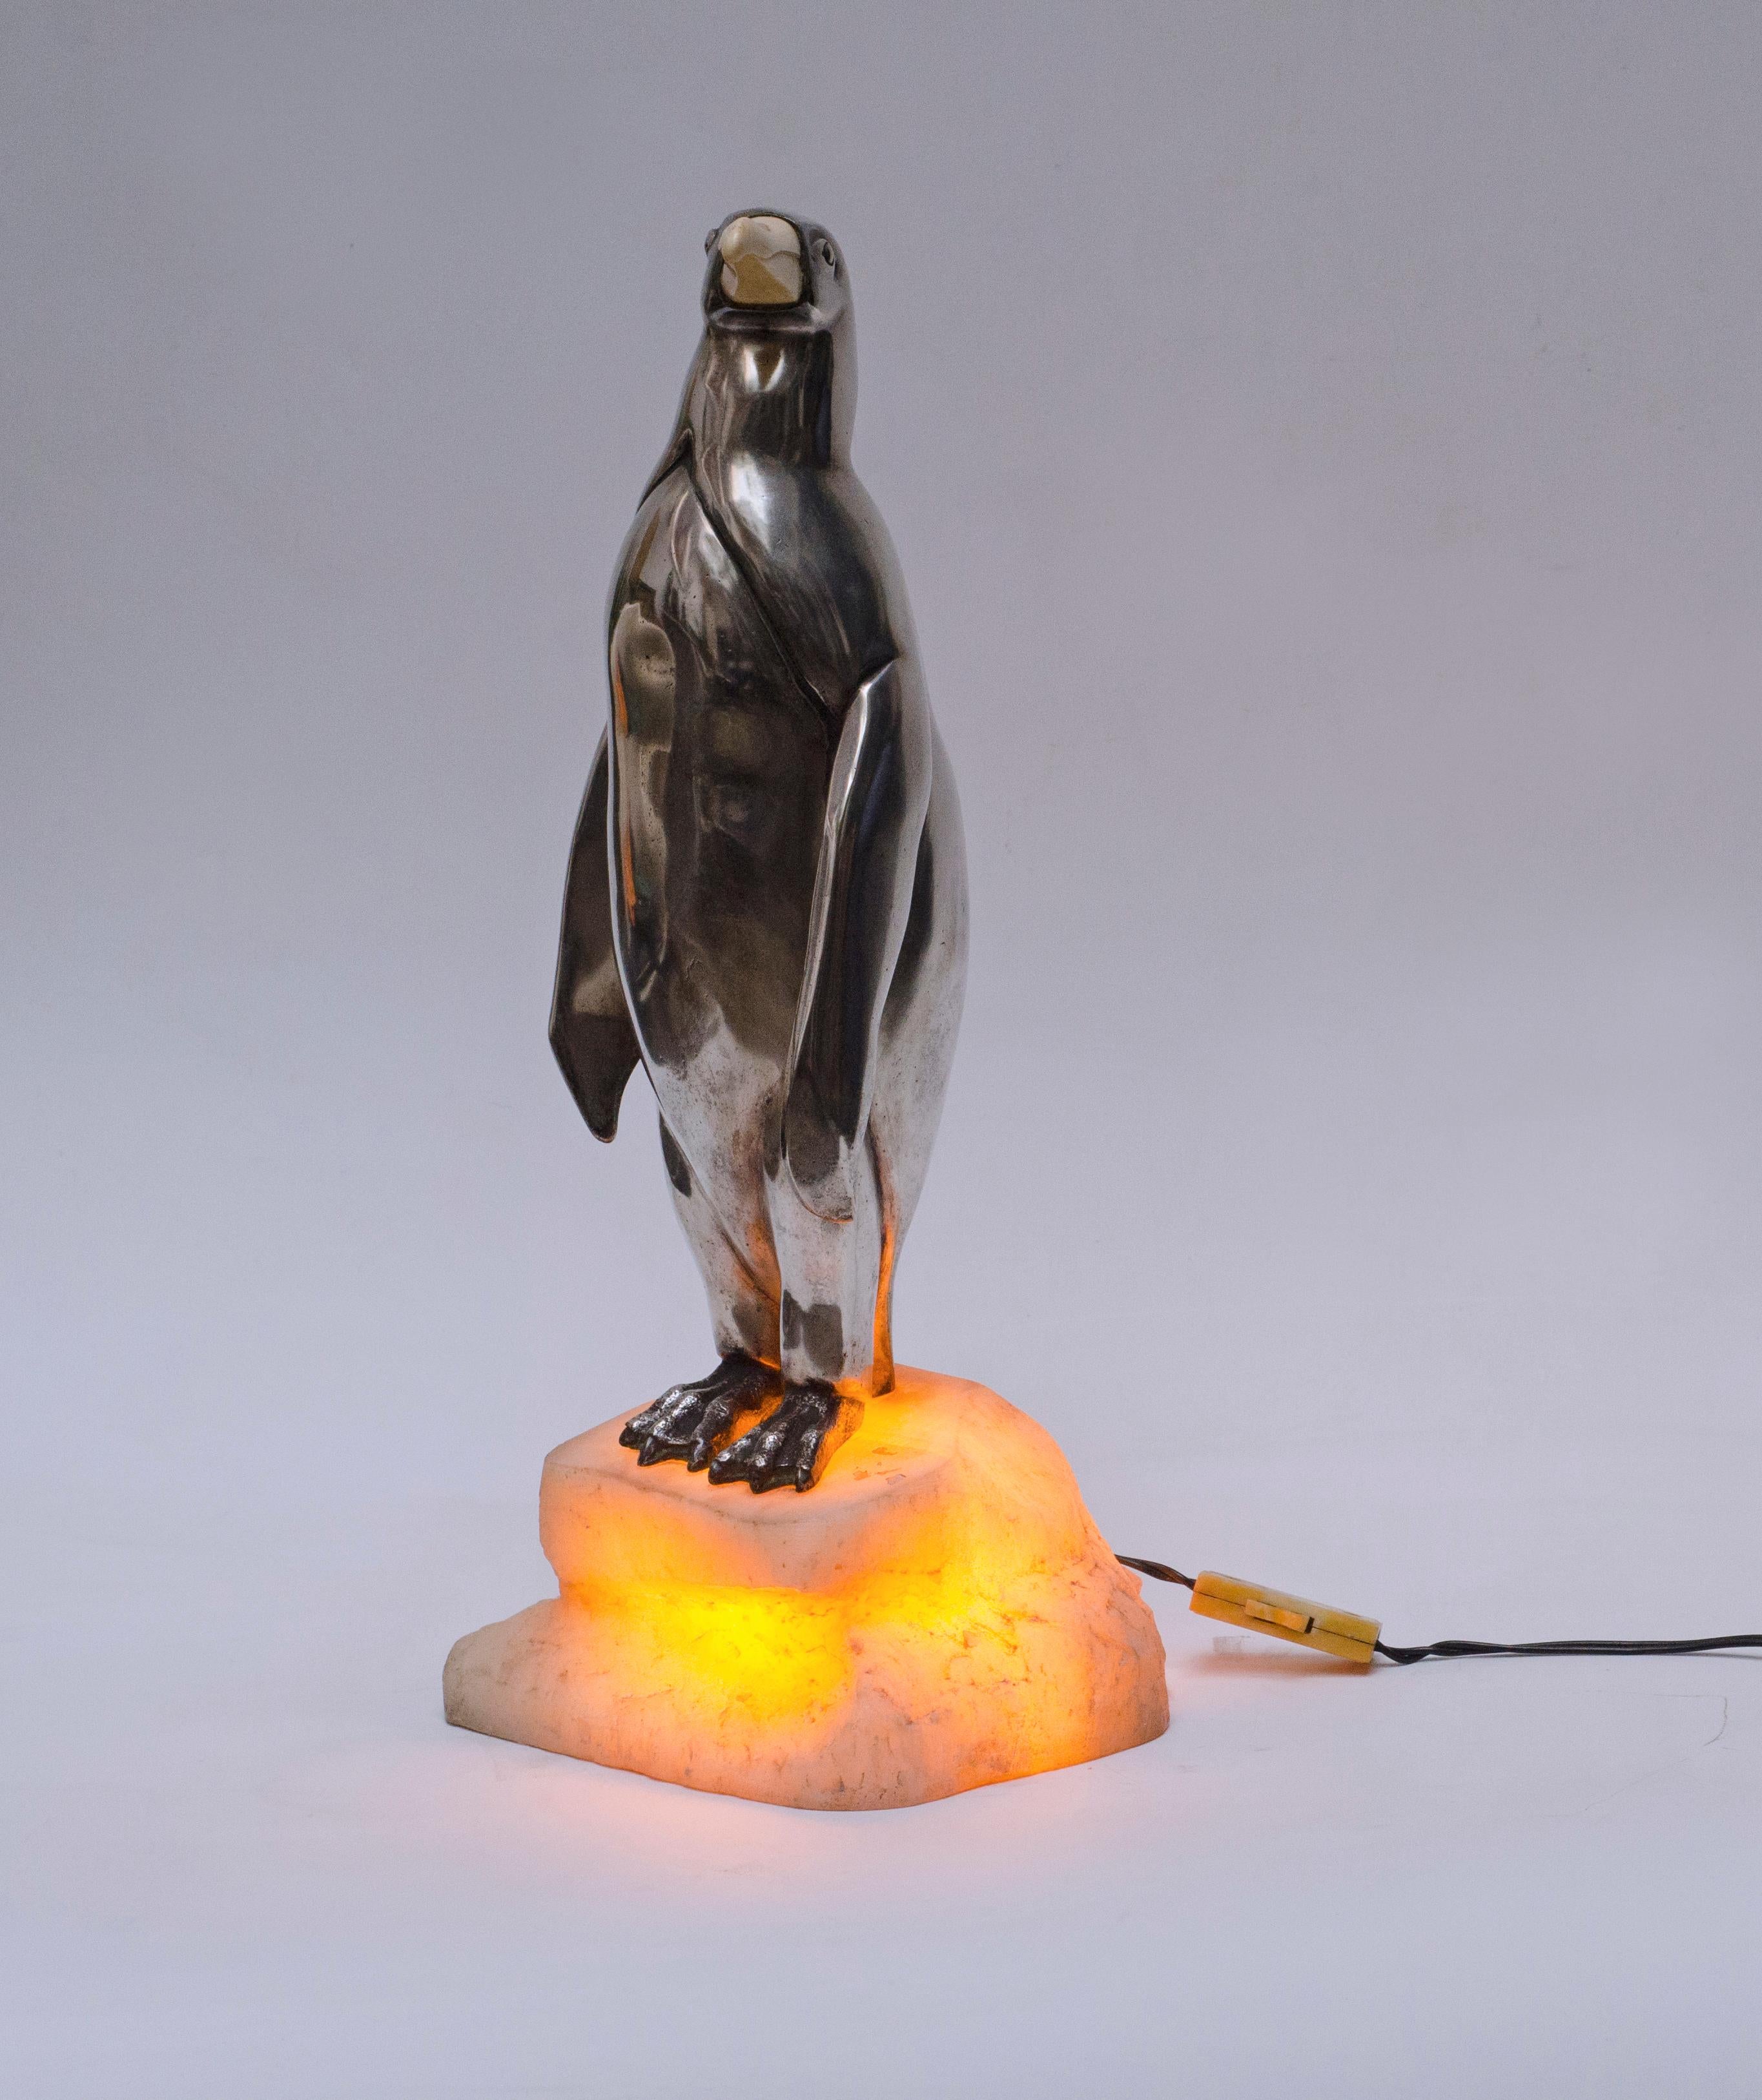 Penguin iluminated sculpture by Marcel André Bouraine (1886 -1948). Silverplated bronze and alabaster base with light.

Bryan Catley (1978) 